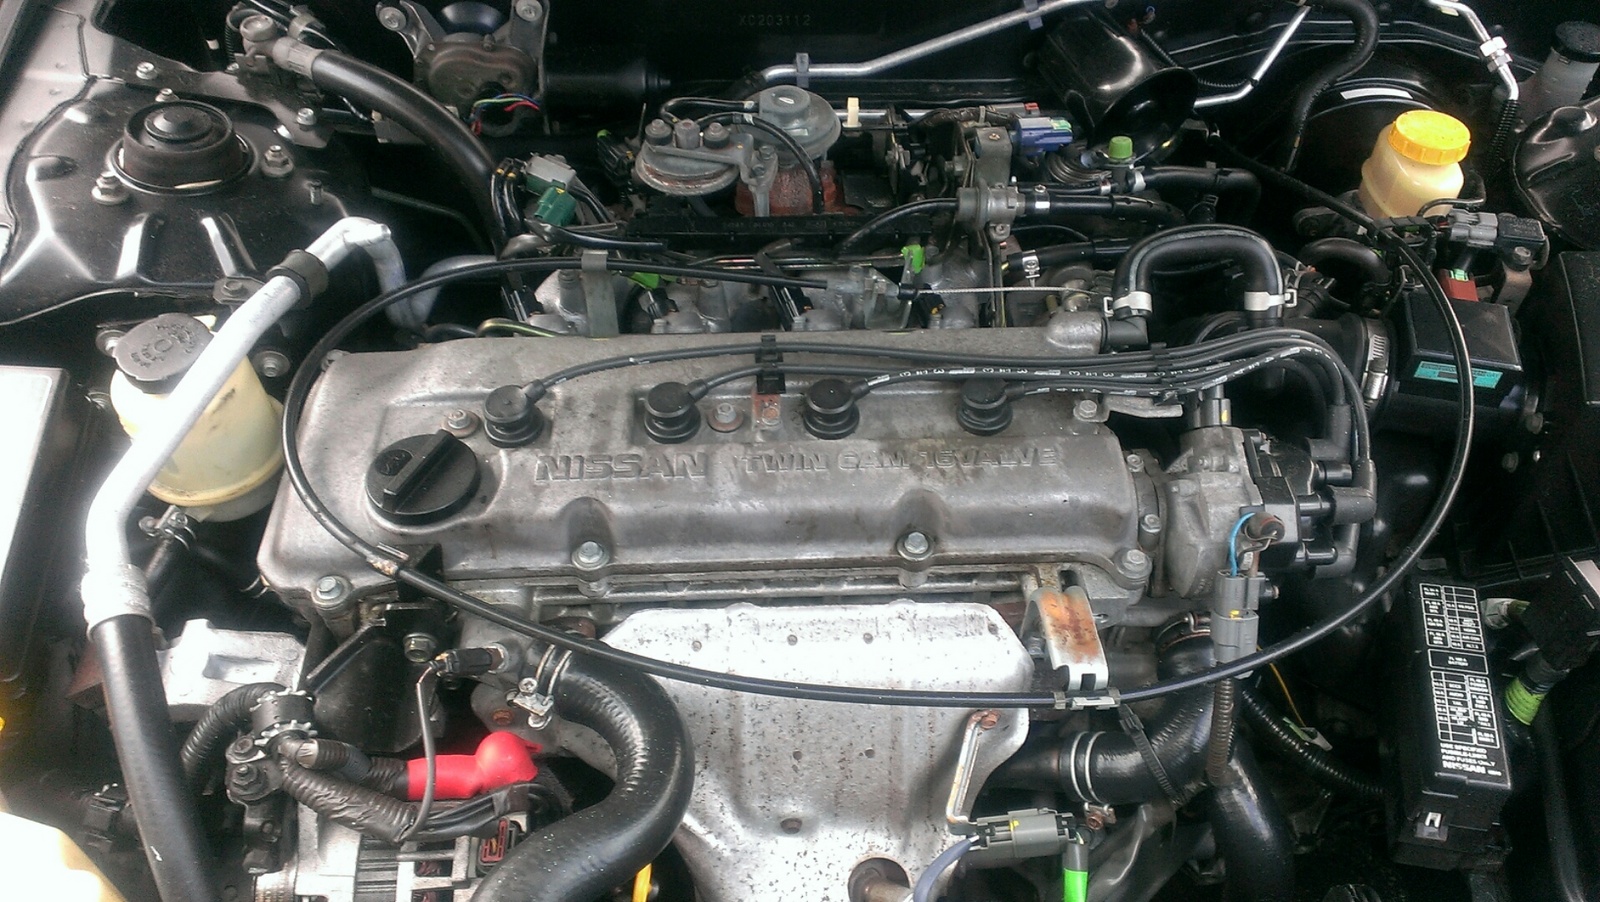 1999 Nissan altima gxe engine #3